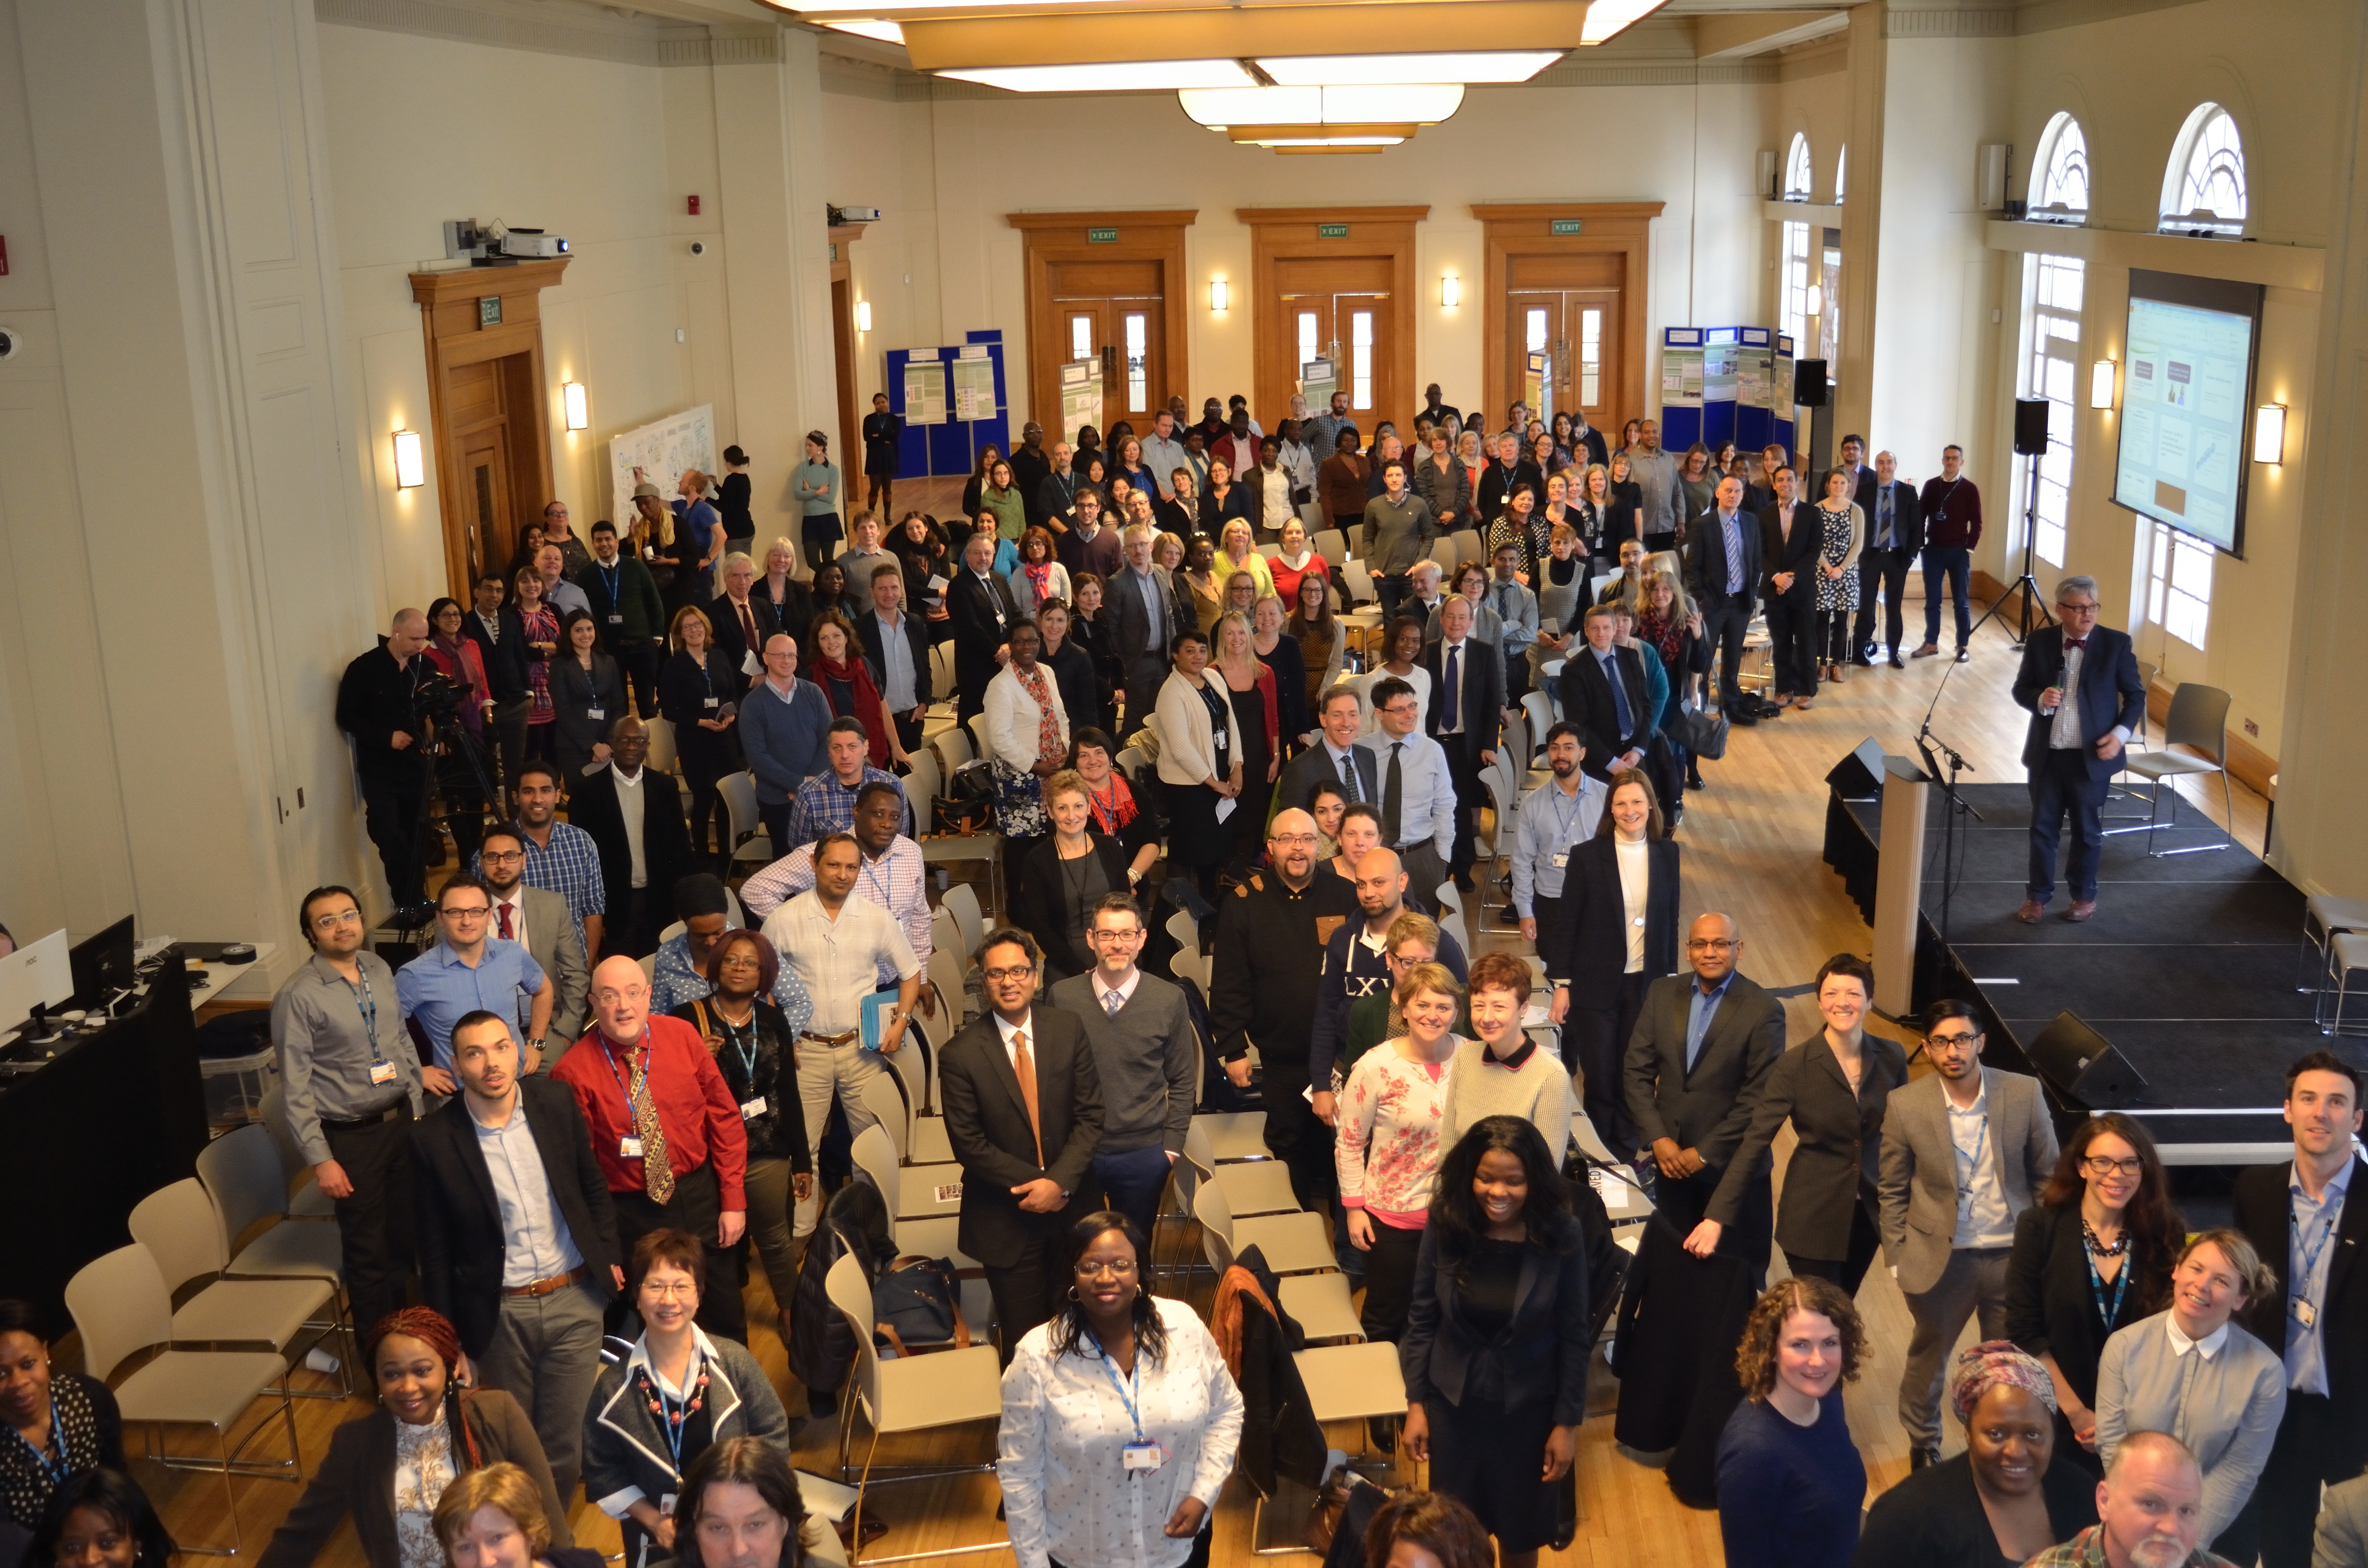 QI Conference delegates - 10 March 2015